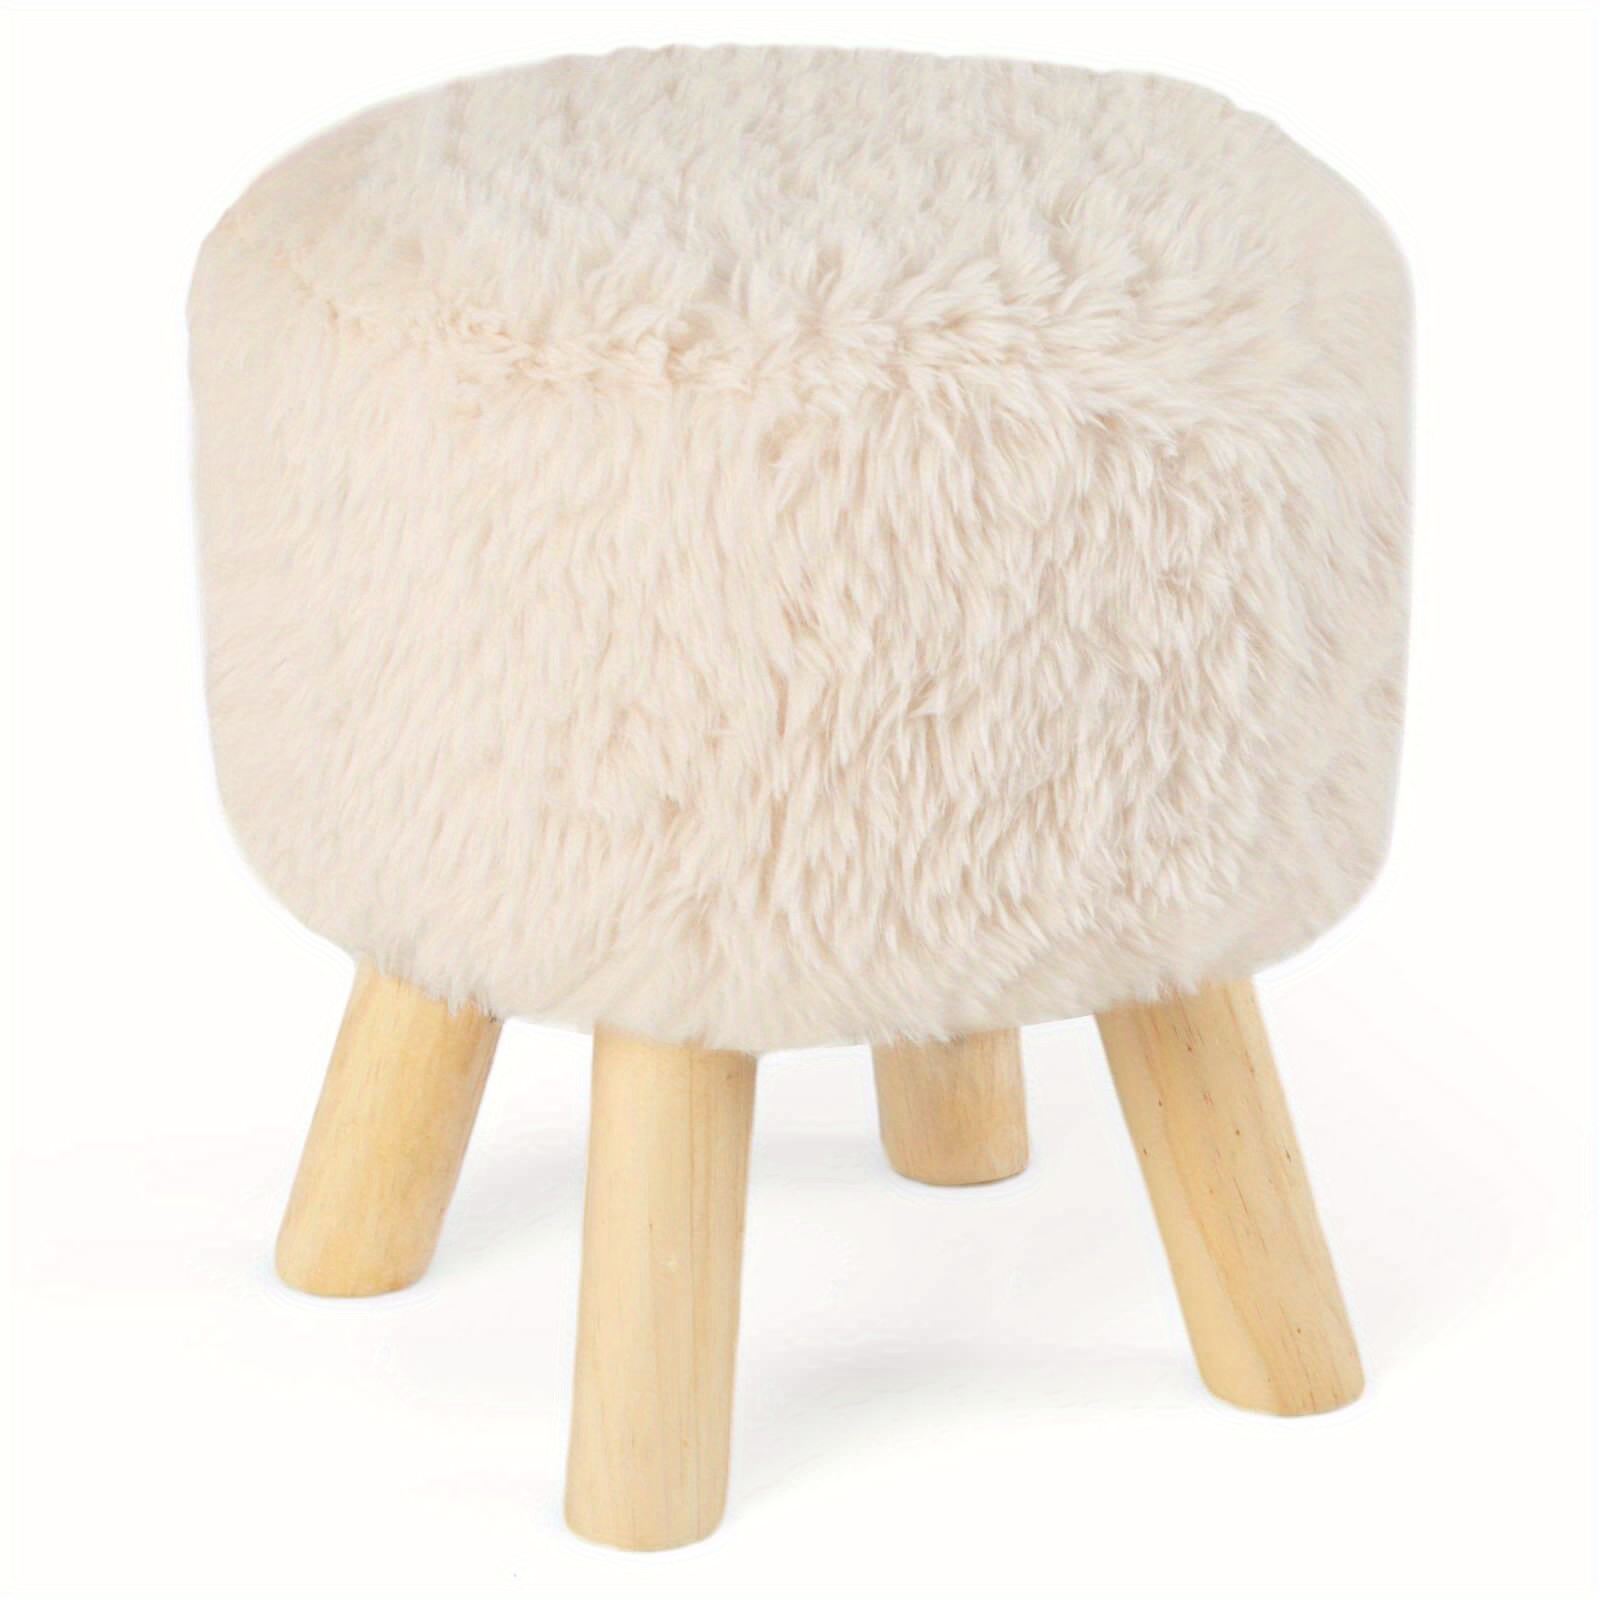 

Safstar Round Footstool Ottoman Faux Fur Upholstered Footrest With Padded Seat